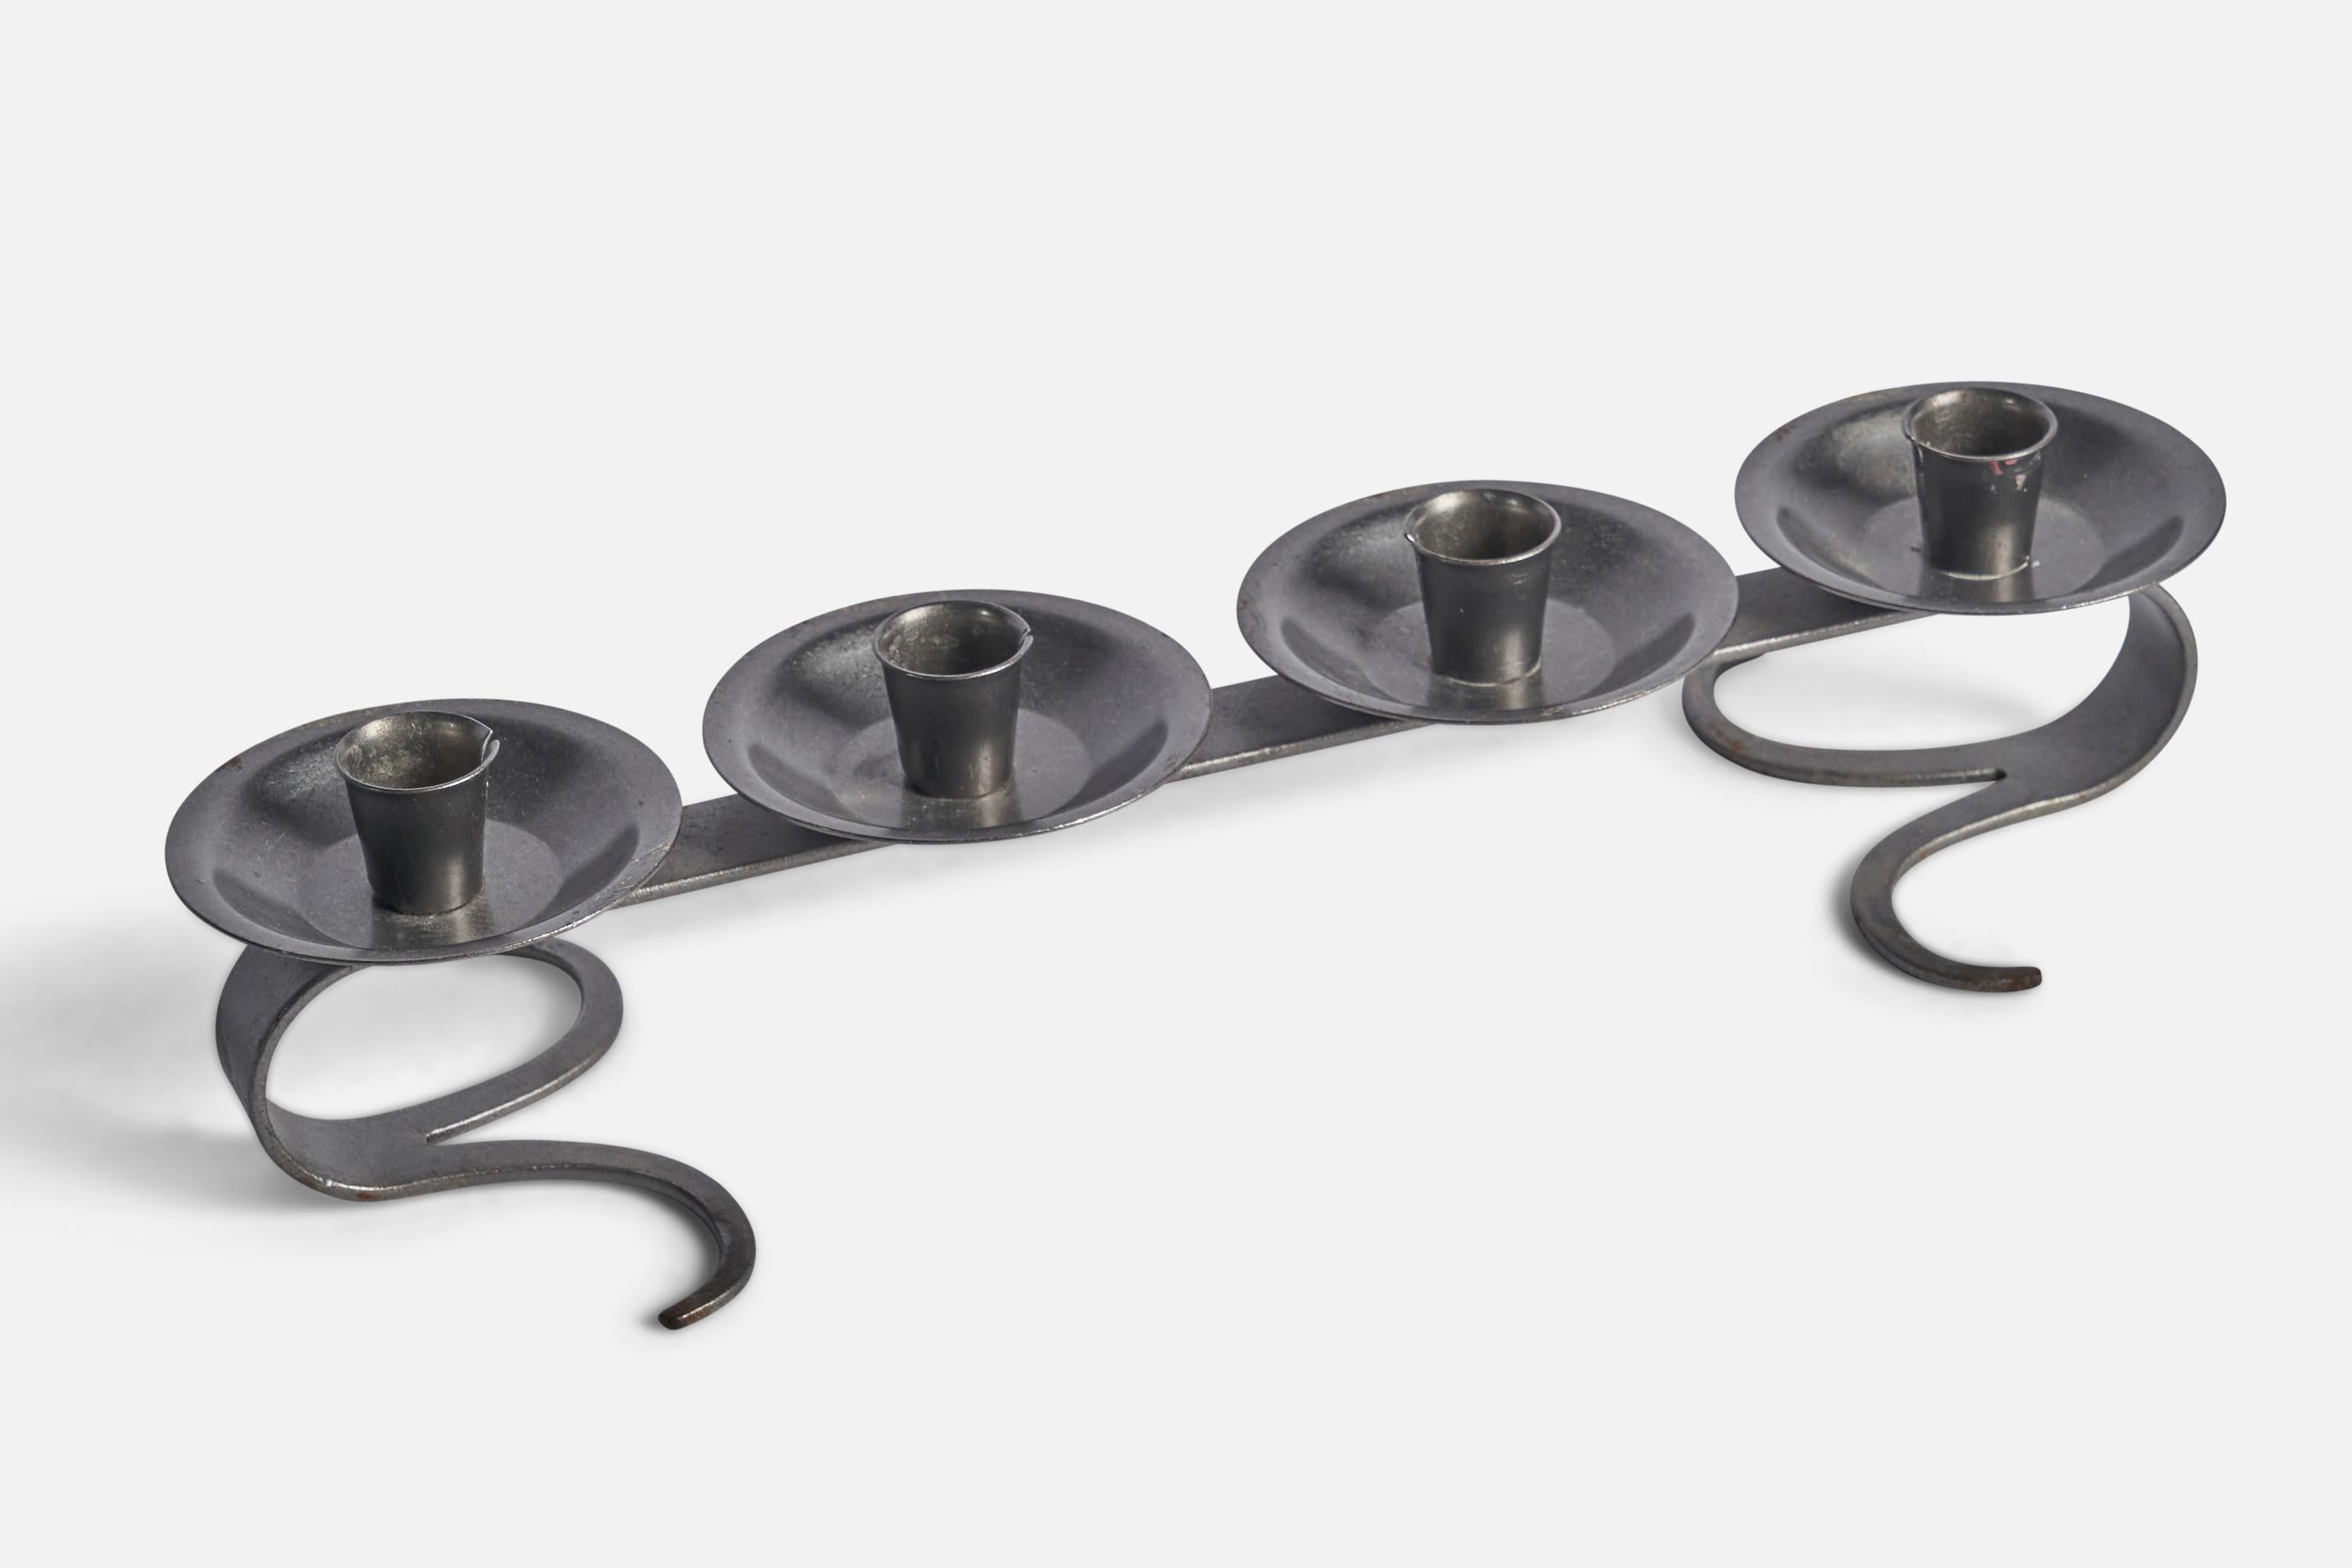 An iron candelabra designed and produced in Sweden, c. 1960s.

Holds 0.85” candles